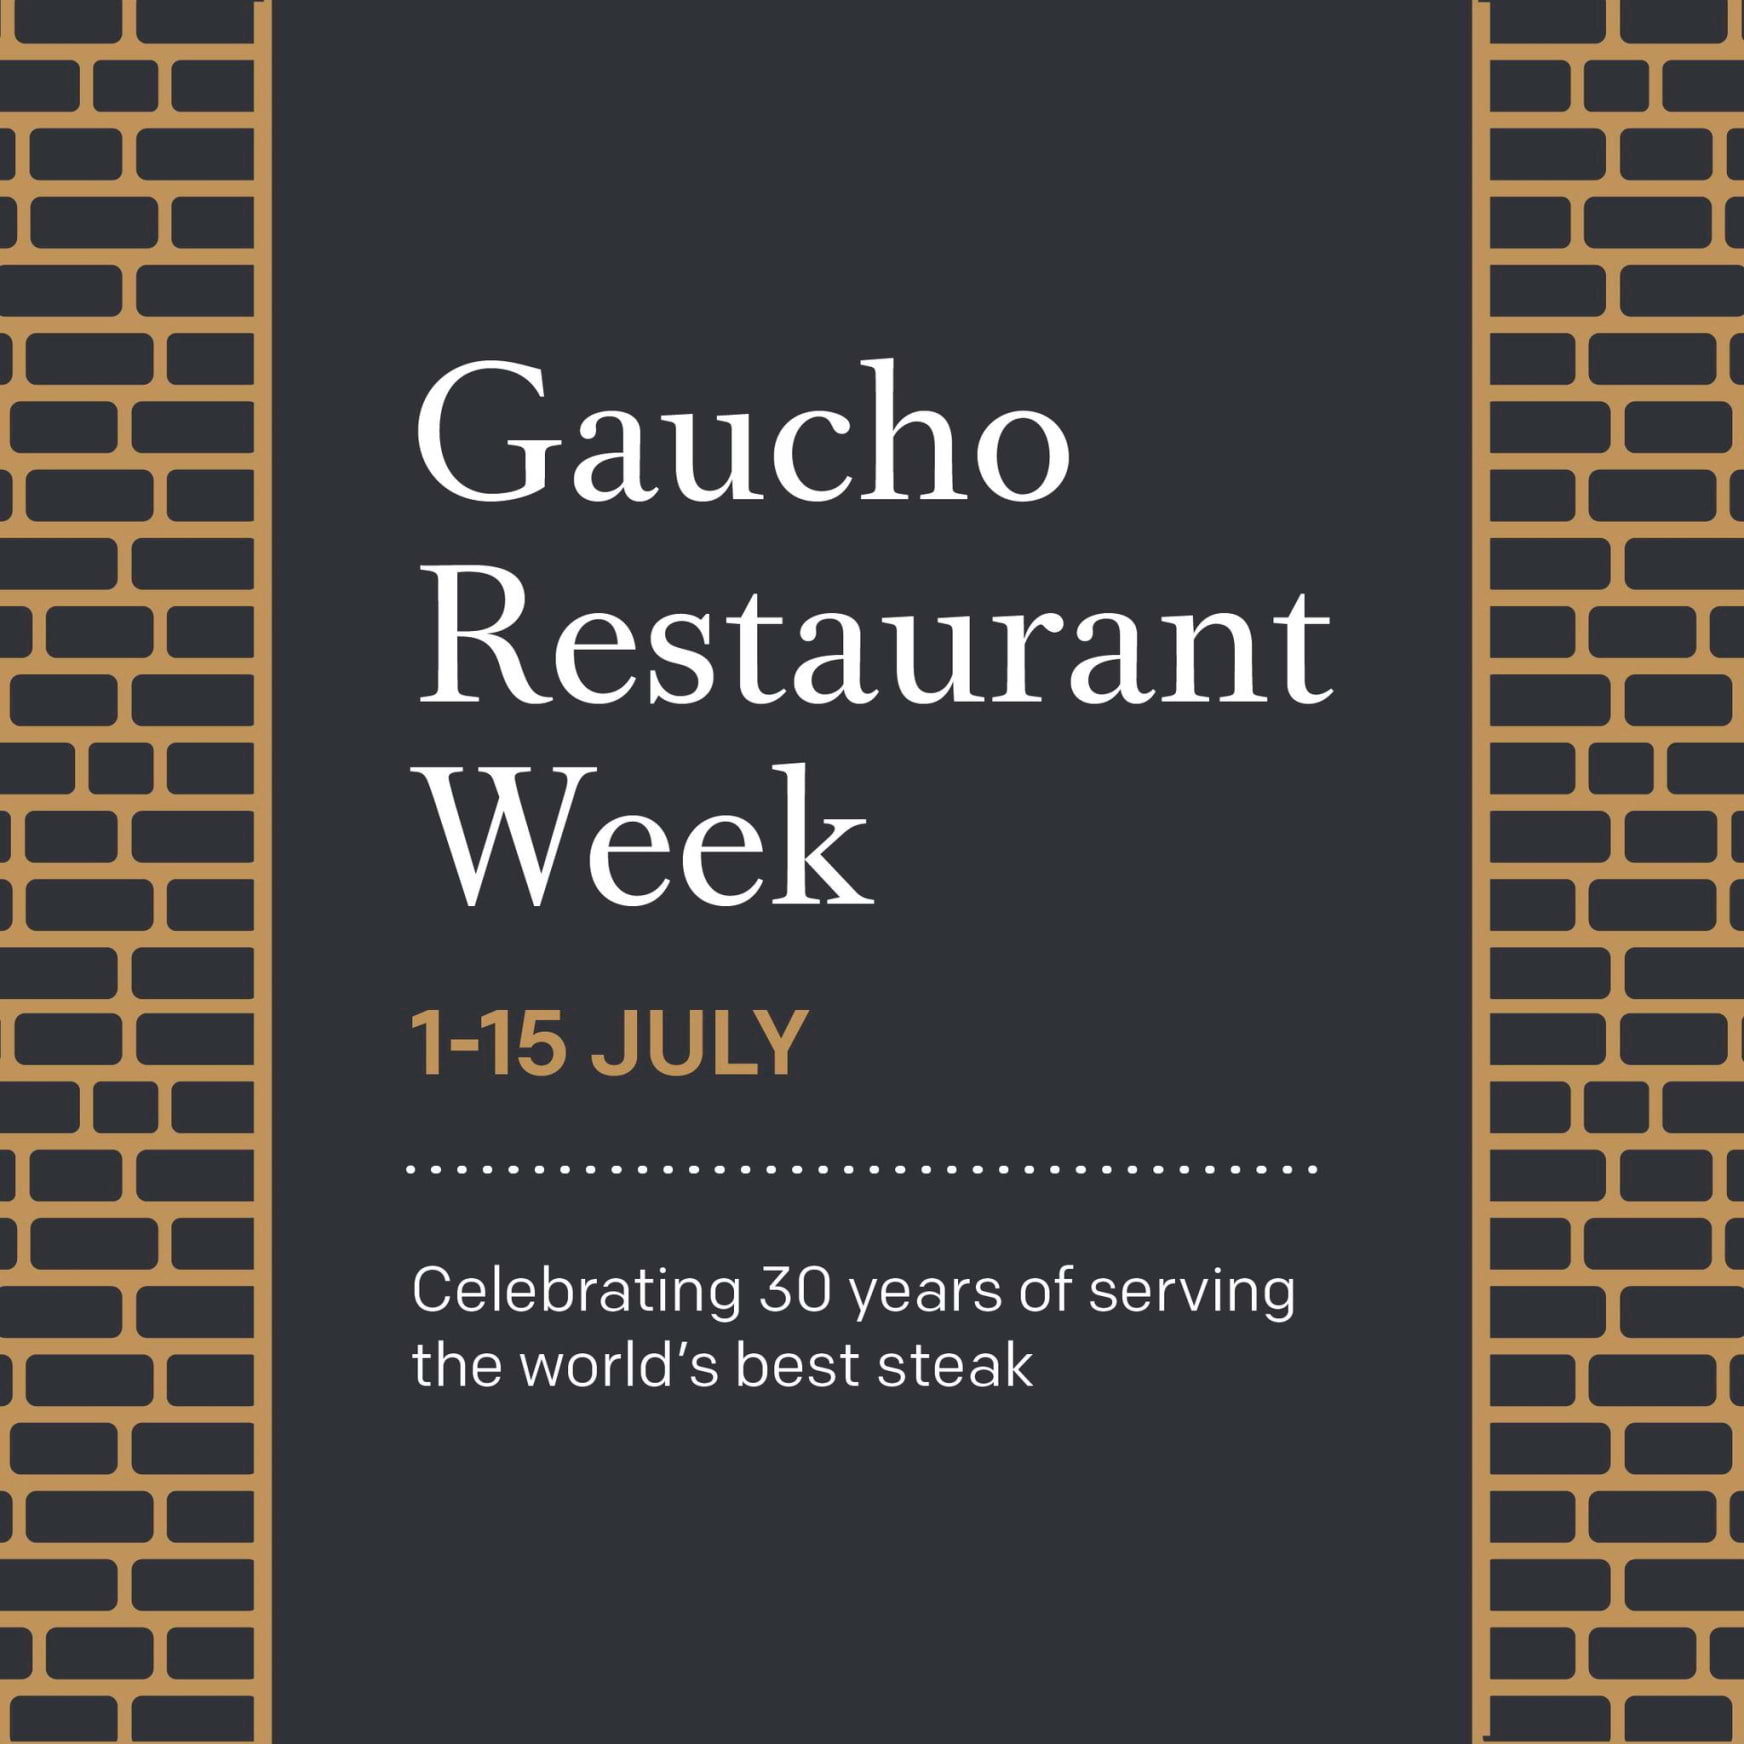 Gaucho is celebrating 30 years with a limited-edition menu